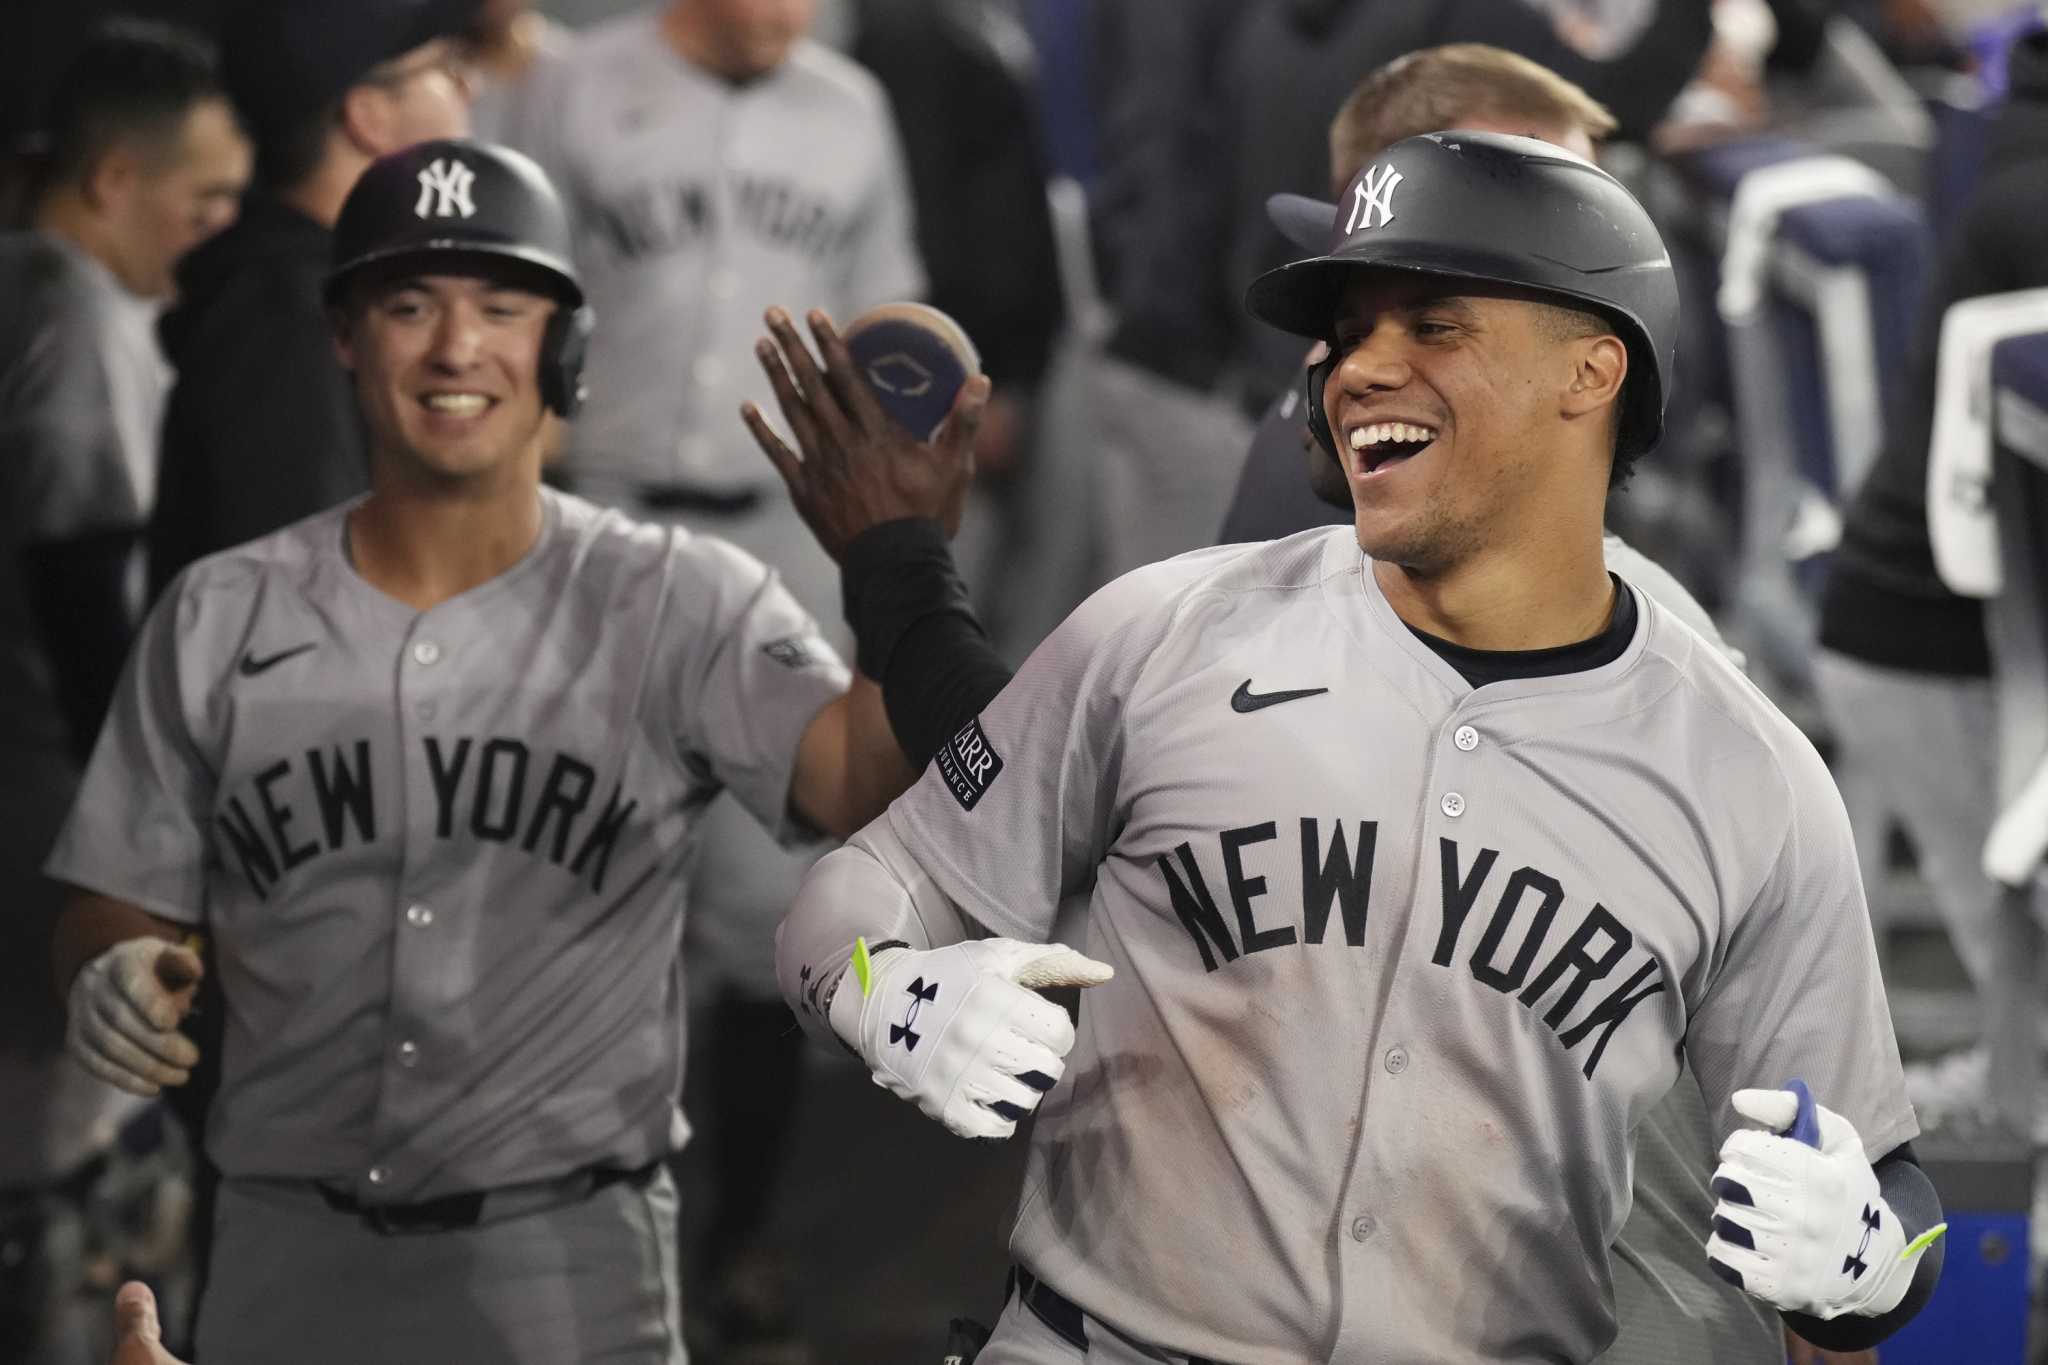 Soto and Torres hit home runs, Judge scored two runs, the Yankees beat the Blue Jays 16-5 and ended their 4-game losing streak